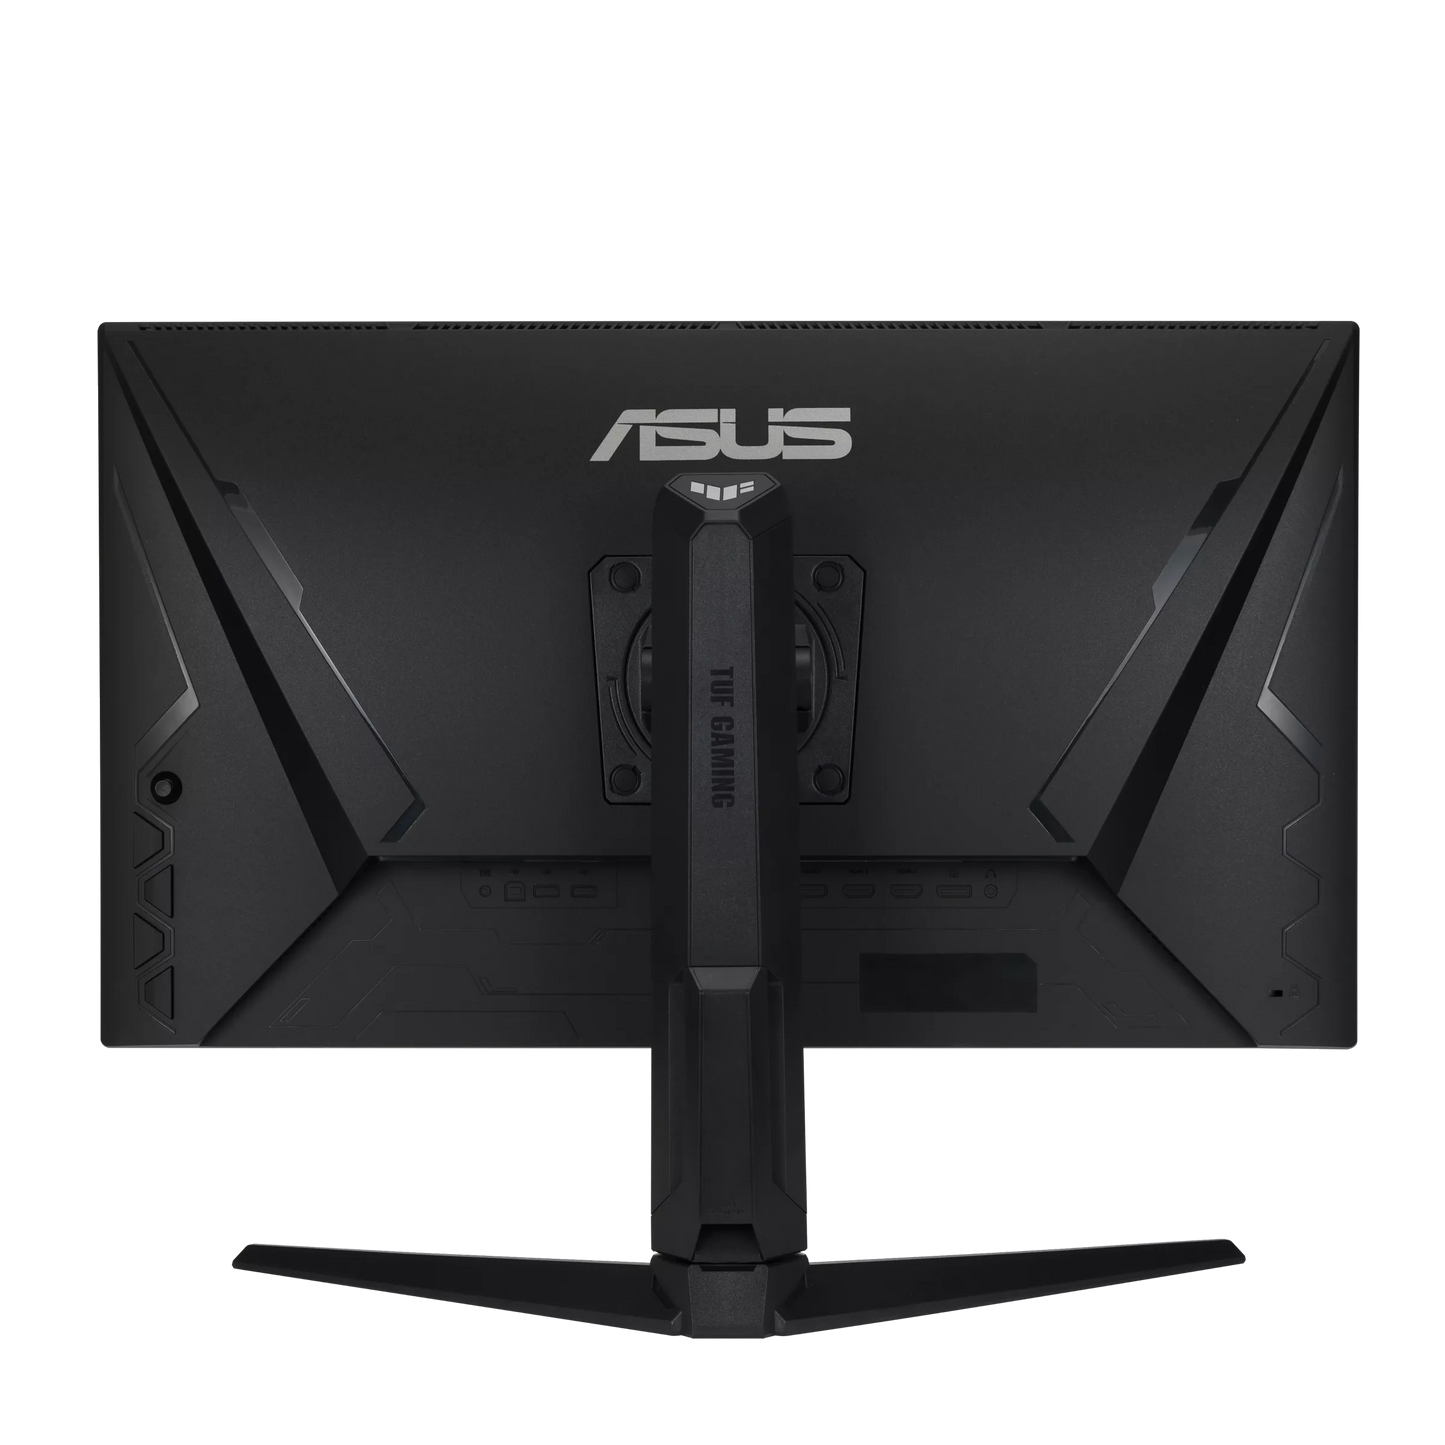 TUF Gaming VG28UQL1A HDMI 2.1 Gaming Monitor — 28-inch 4K UHD (3840 x 2160), Fast IPS, 144 Hz, 1 ms GTG, NVIDIA G-Sync compatible, AMD FreeSync™ Premium, DSC, ELMB Sync, Variable Overdrive, DisplayHDR™ 400, DCI-P3 90%-Monitor-ASUS-computerspace